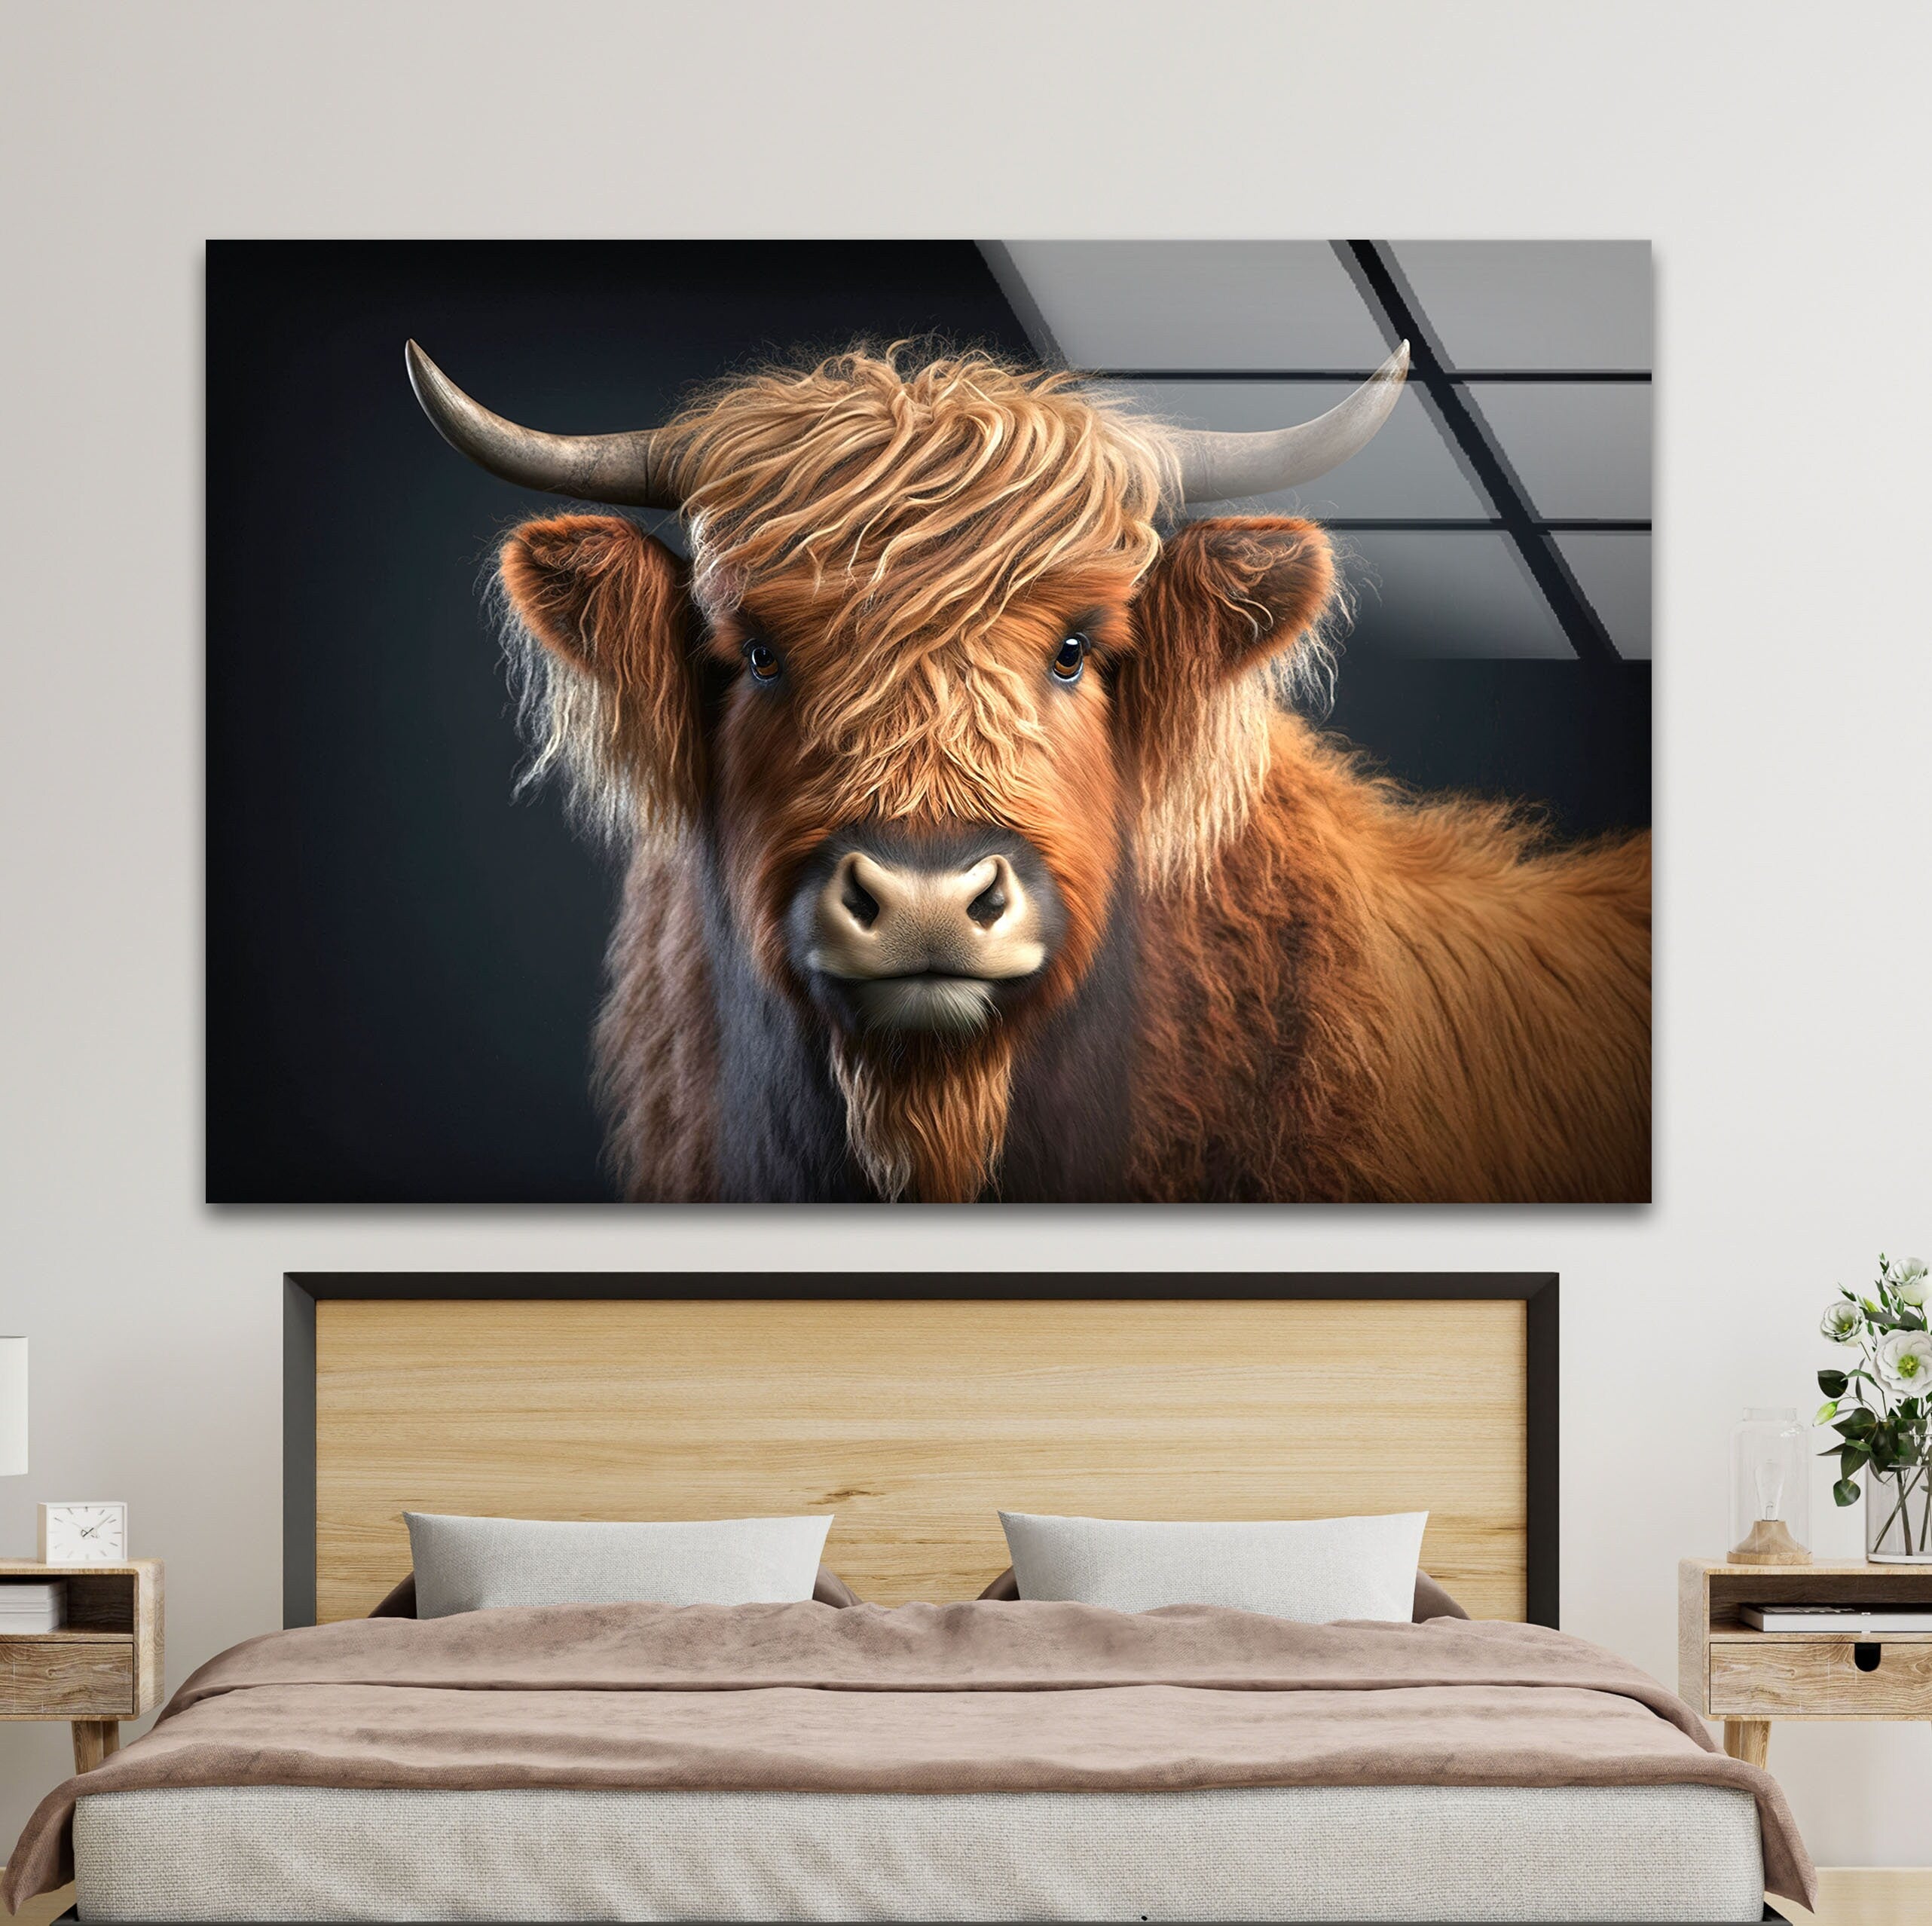 a picture of a brown cow with long hair on a wall above a bed